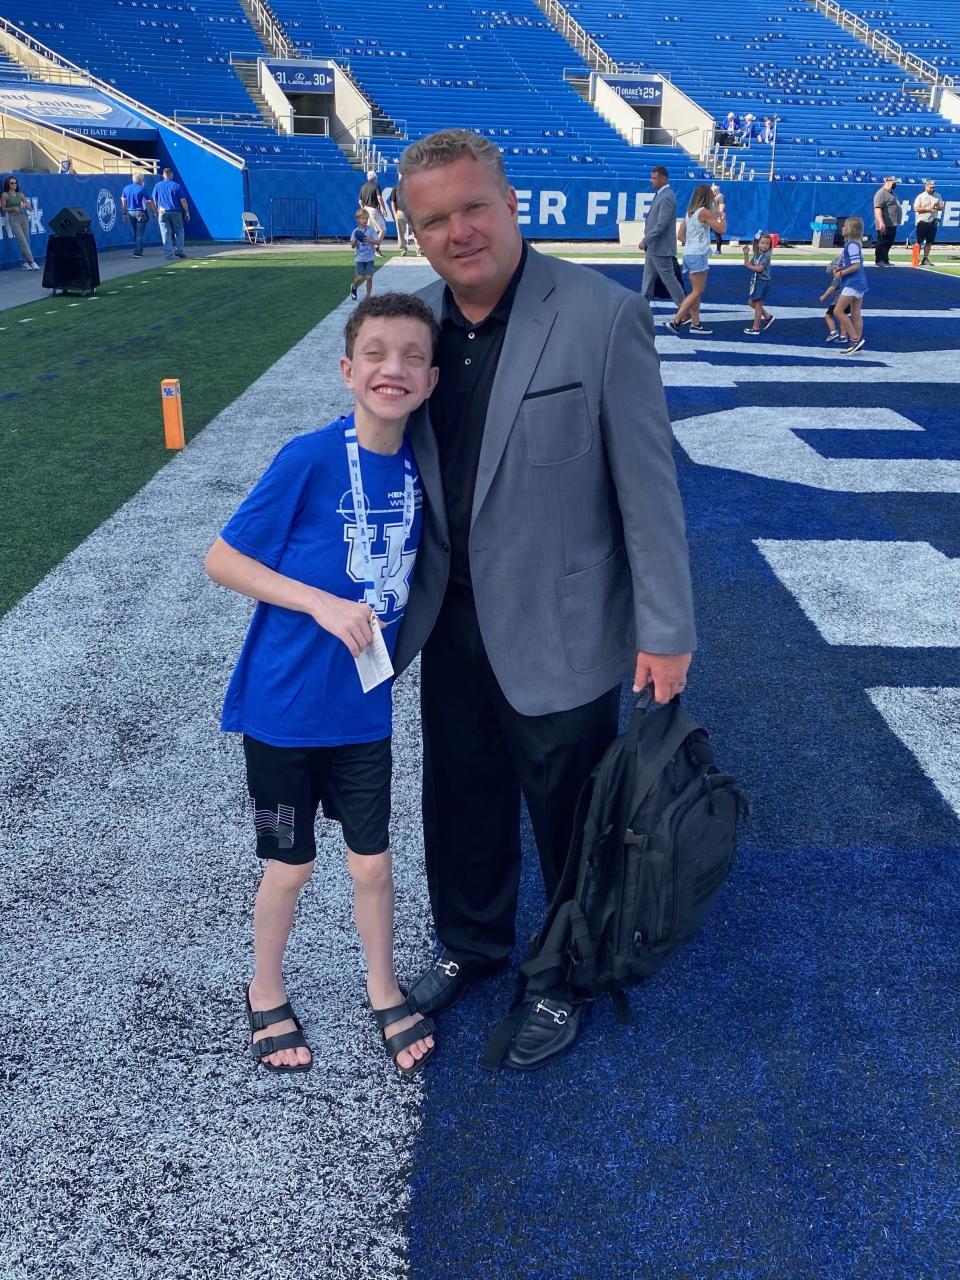 Stone Wolford on the field in Lexington with Eric Wolford, who left Kentucky to lead Alabama football's offensive line ahead of the 2022 season.